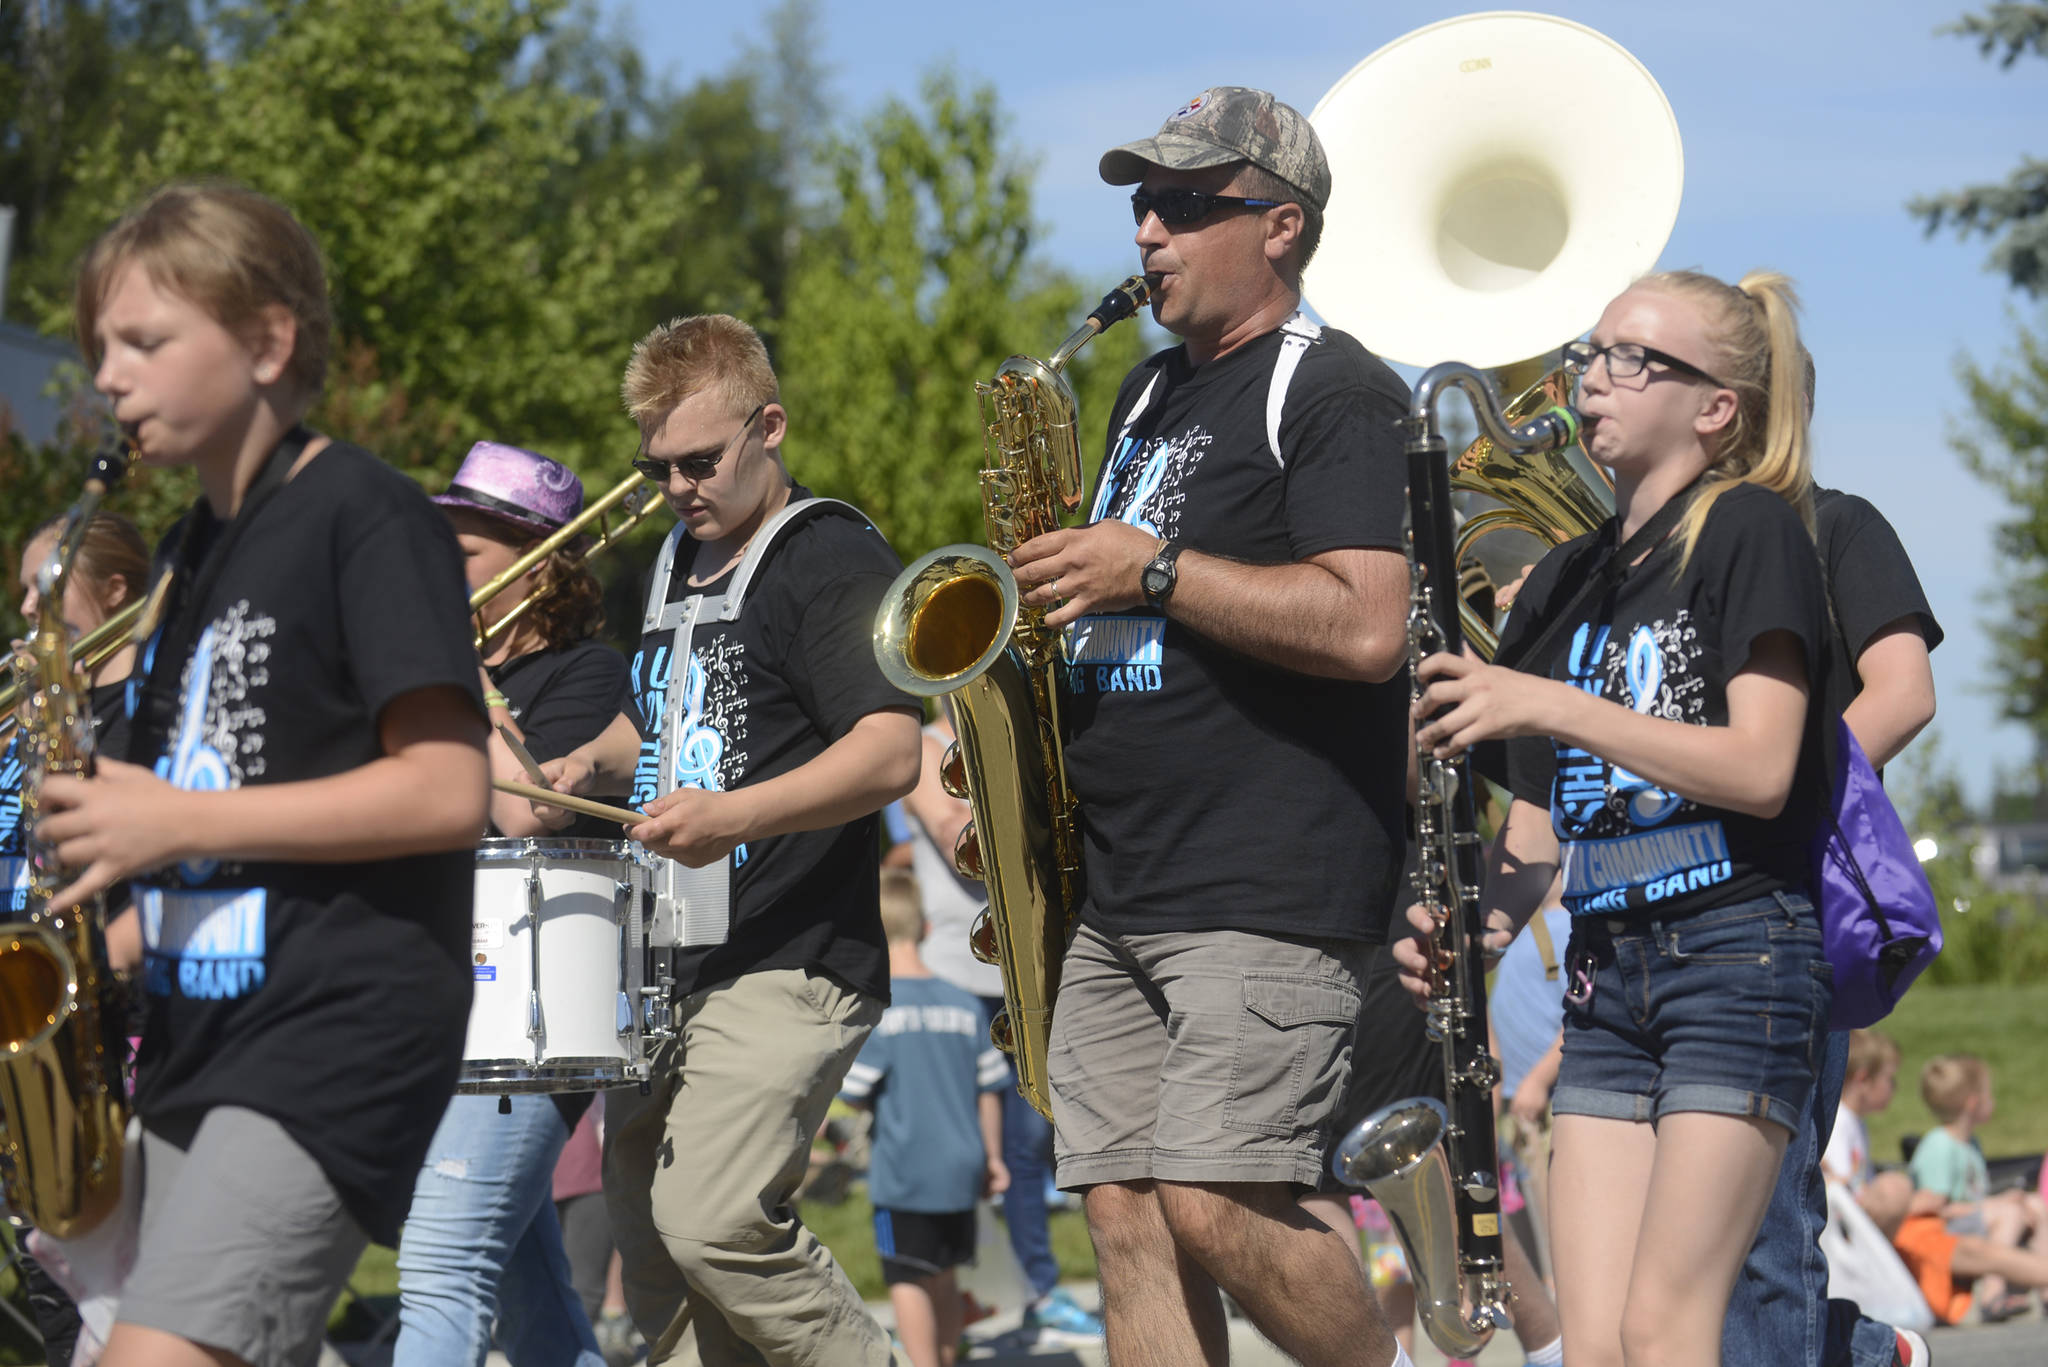 Members of the Soldotna Community Marching Band march in Soldotna’s Progress Days Parade on Saturday, July 22, 2017 in Soldotna, Alaska.